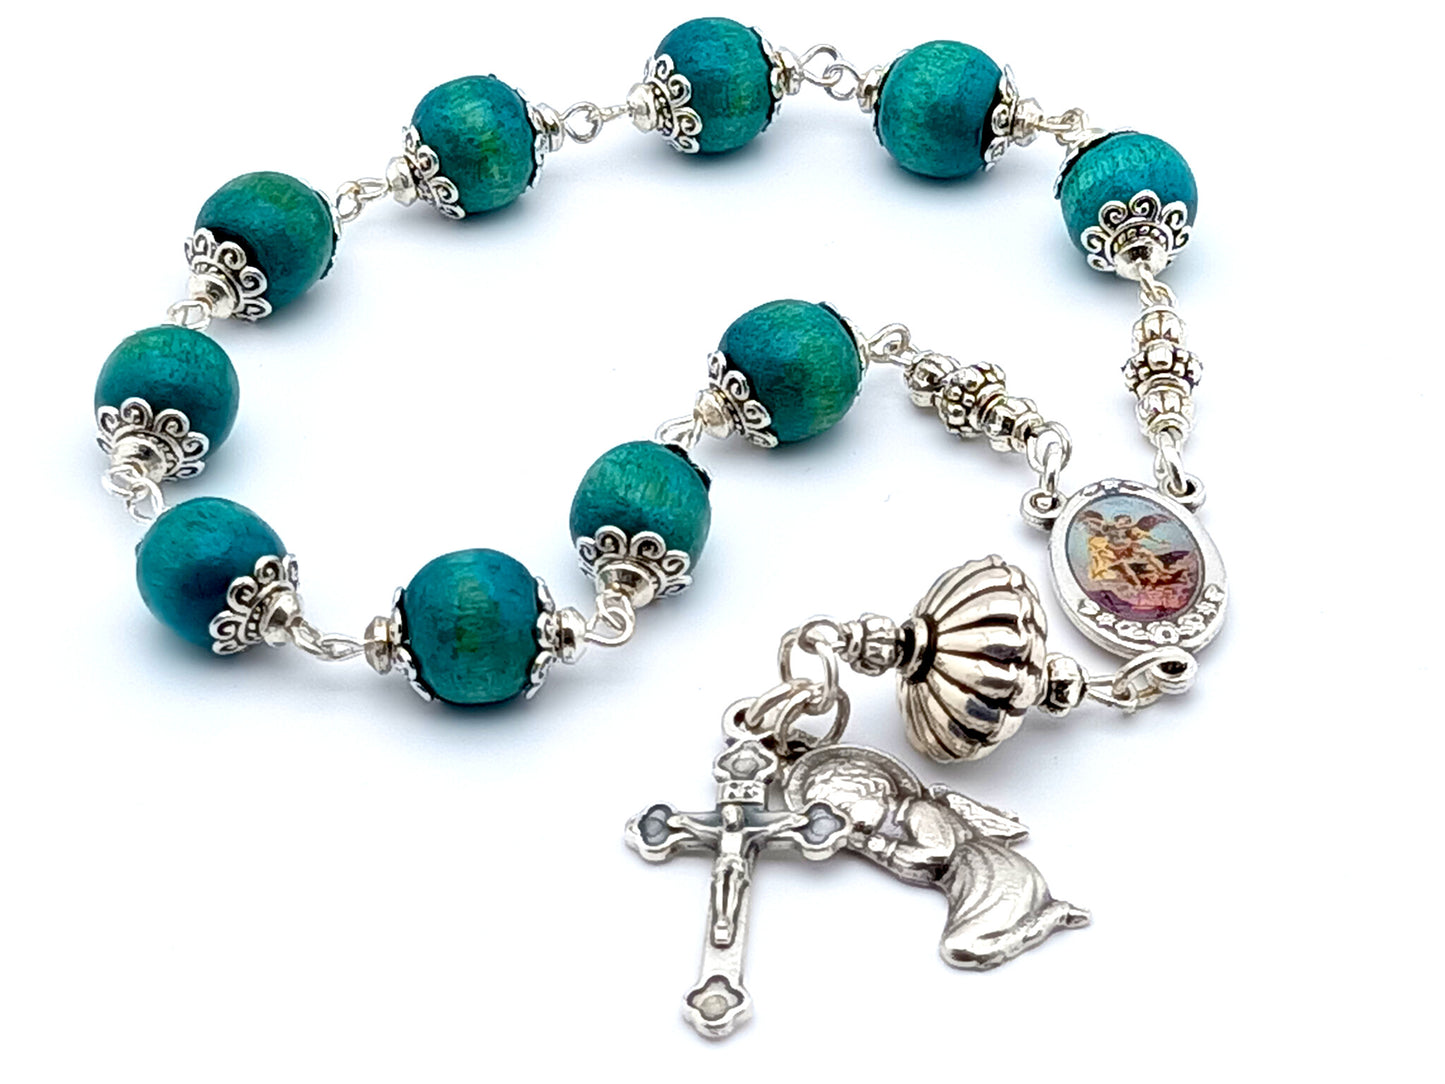 Saint Michael unique rosary beads single decade rosary with green wooden and silver beads, picture centre medal and silver end medal and crucifix.